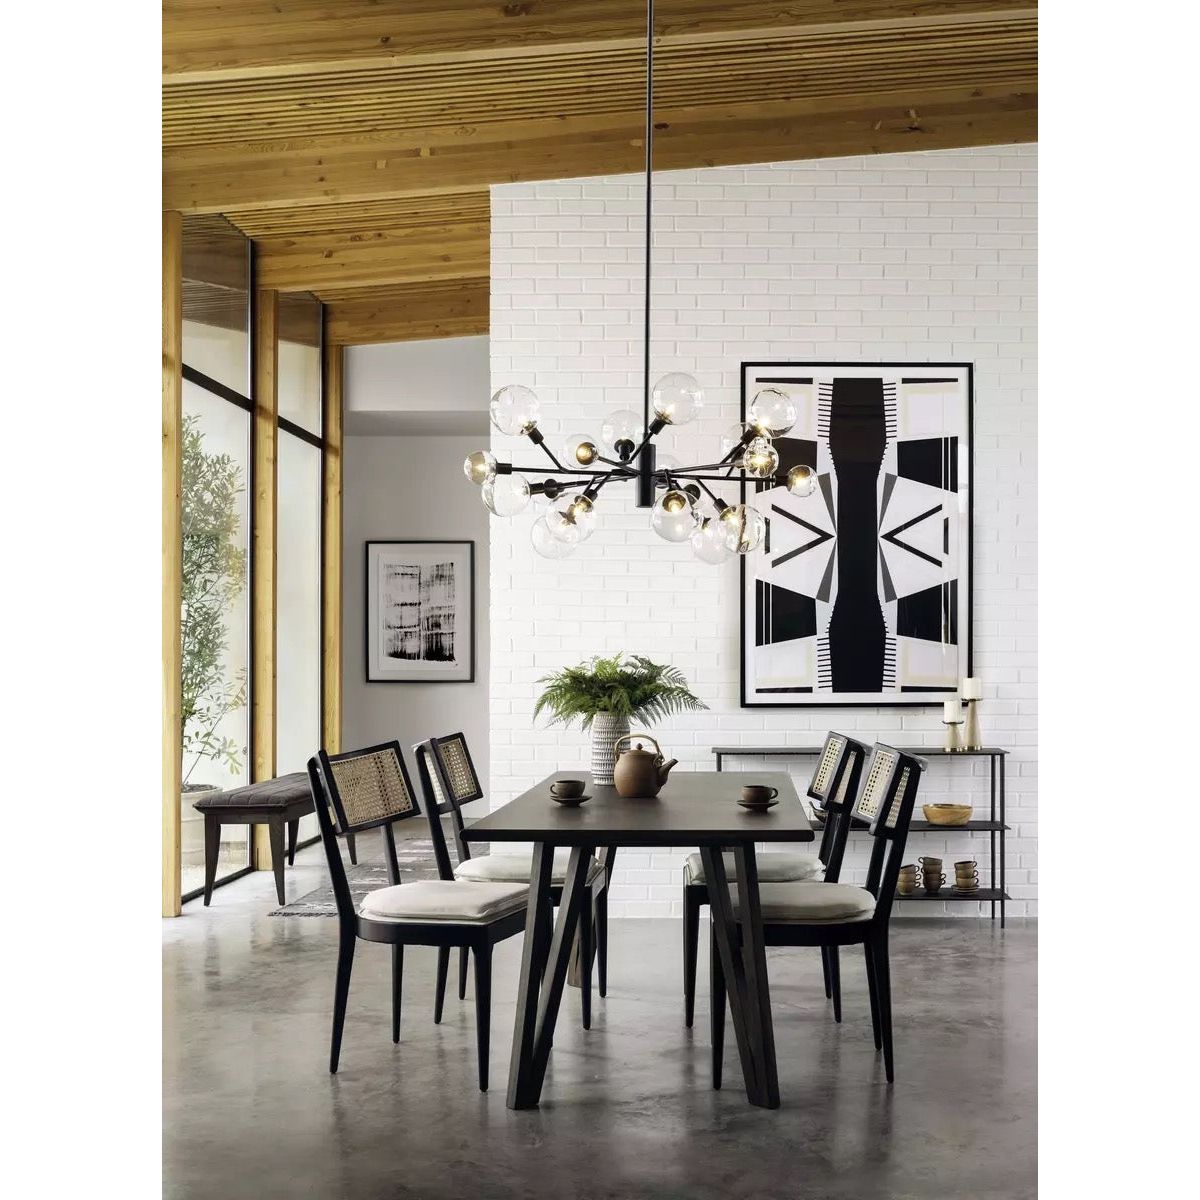 A modern dining room features an ebony-finished nettlewood dining table and four matching Britt Dining Chairs with high-performance linen-blend seating. A large, contemporary chandelier with multiple bulbs hangs above the table. A white brick wall displays black and white abstract art, while a wooden ceiling and large windows bring in natural light.